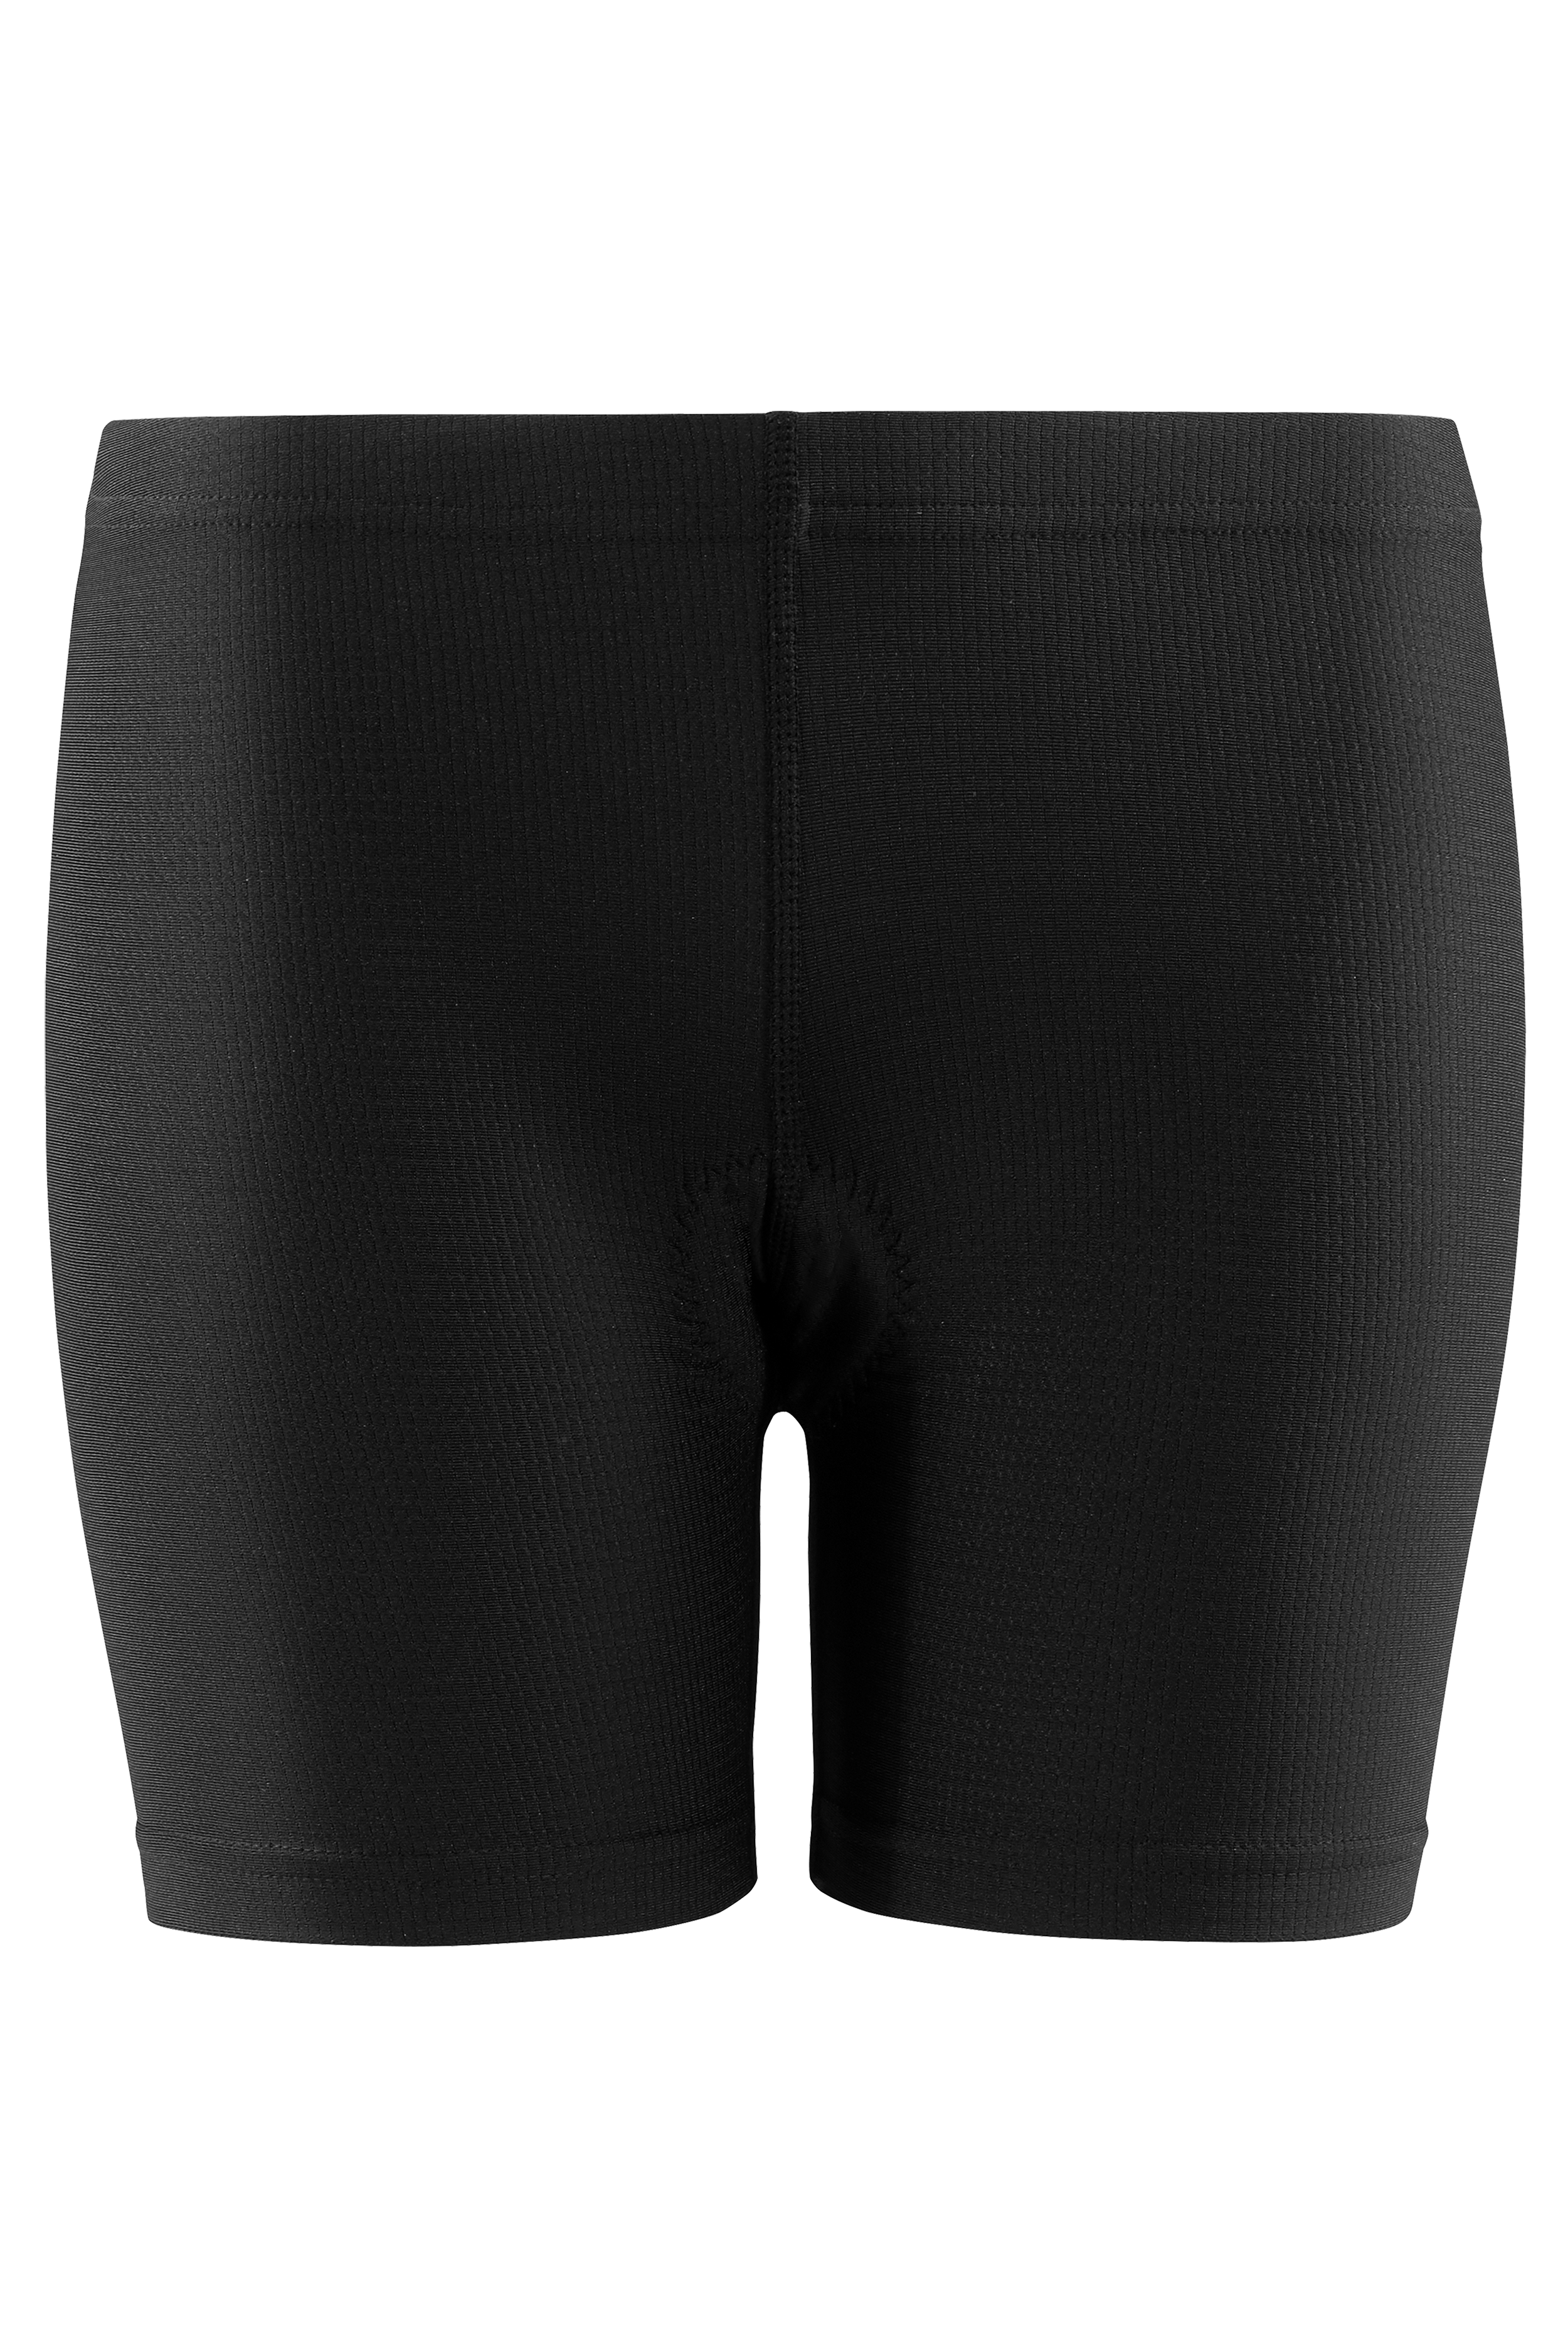 CUBE Liner Shorts ROOKIE